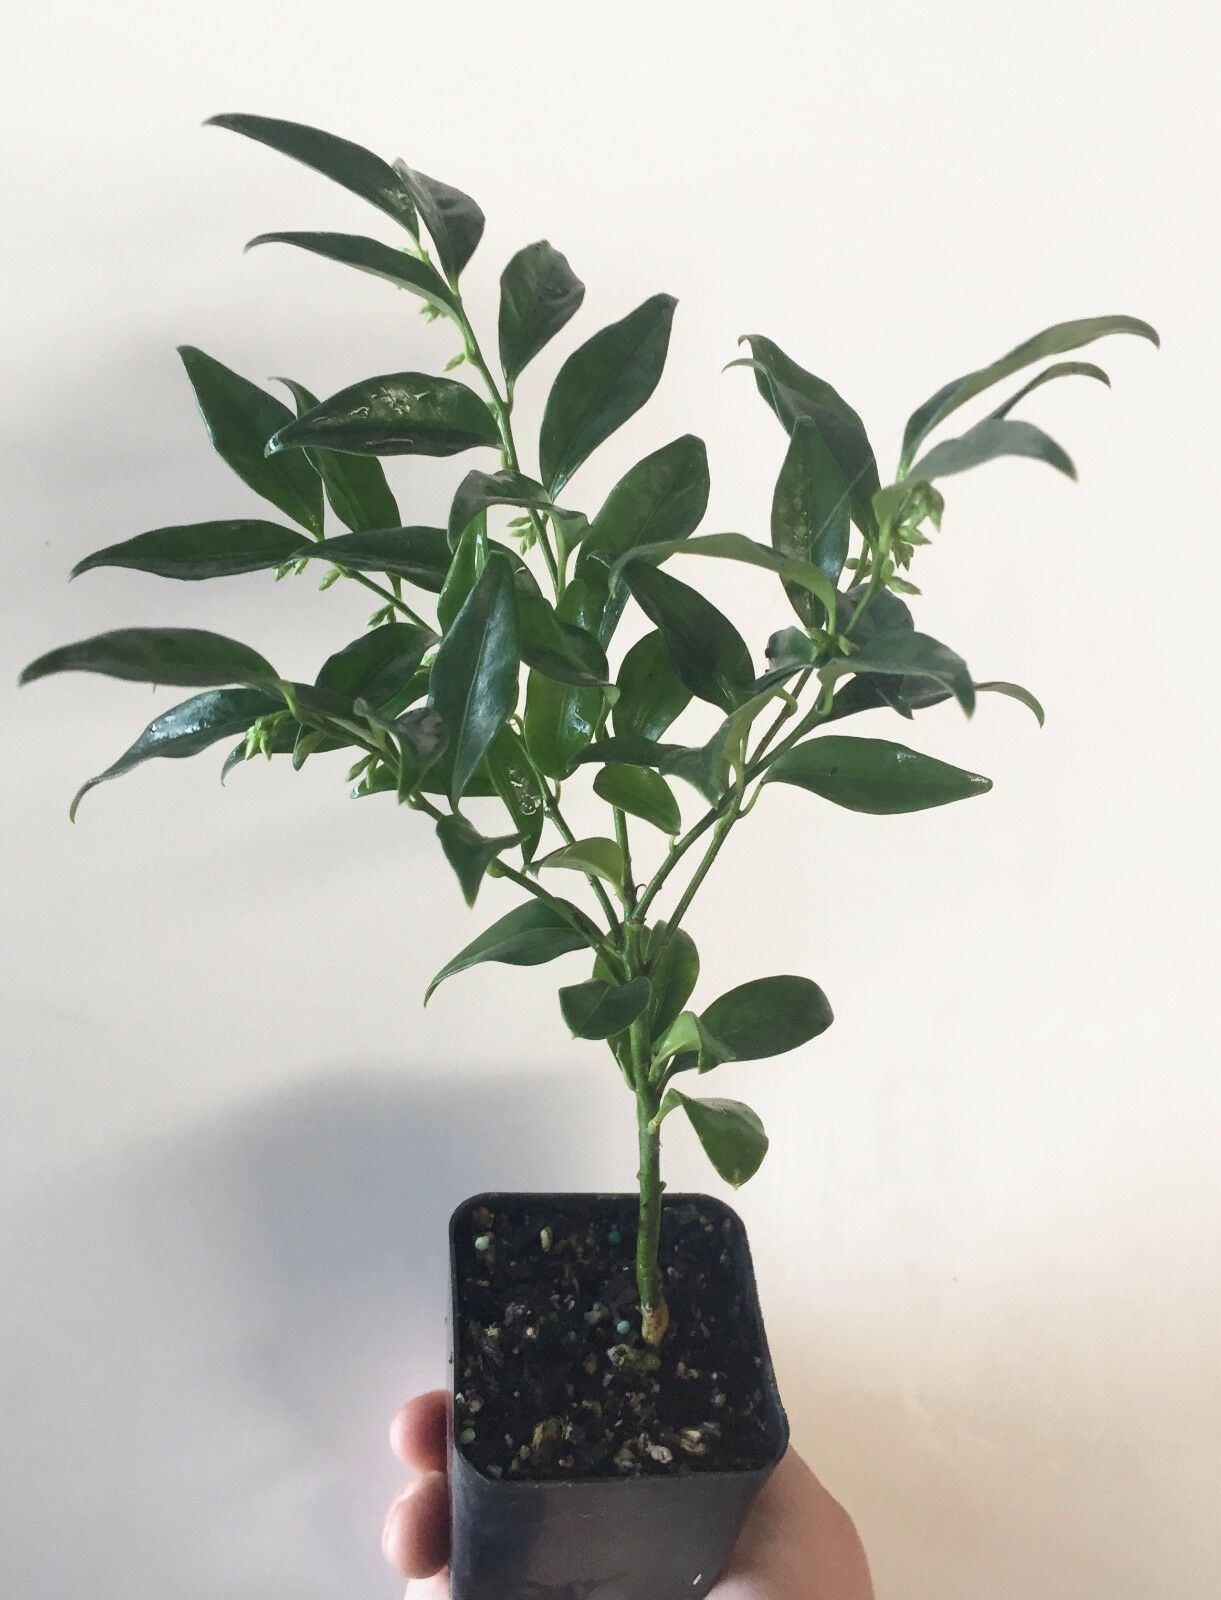 4 Sarcococca ruscifolia, Very Fragrant Late Winter Flowers  - 3" to 6" Tall - $34.90